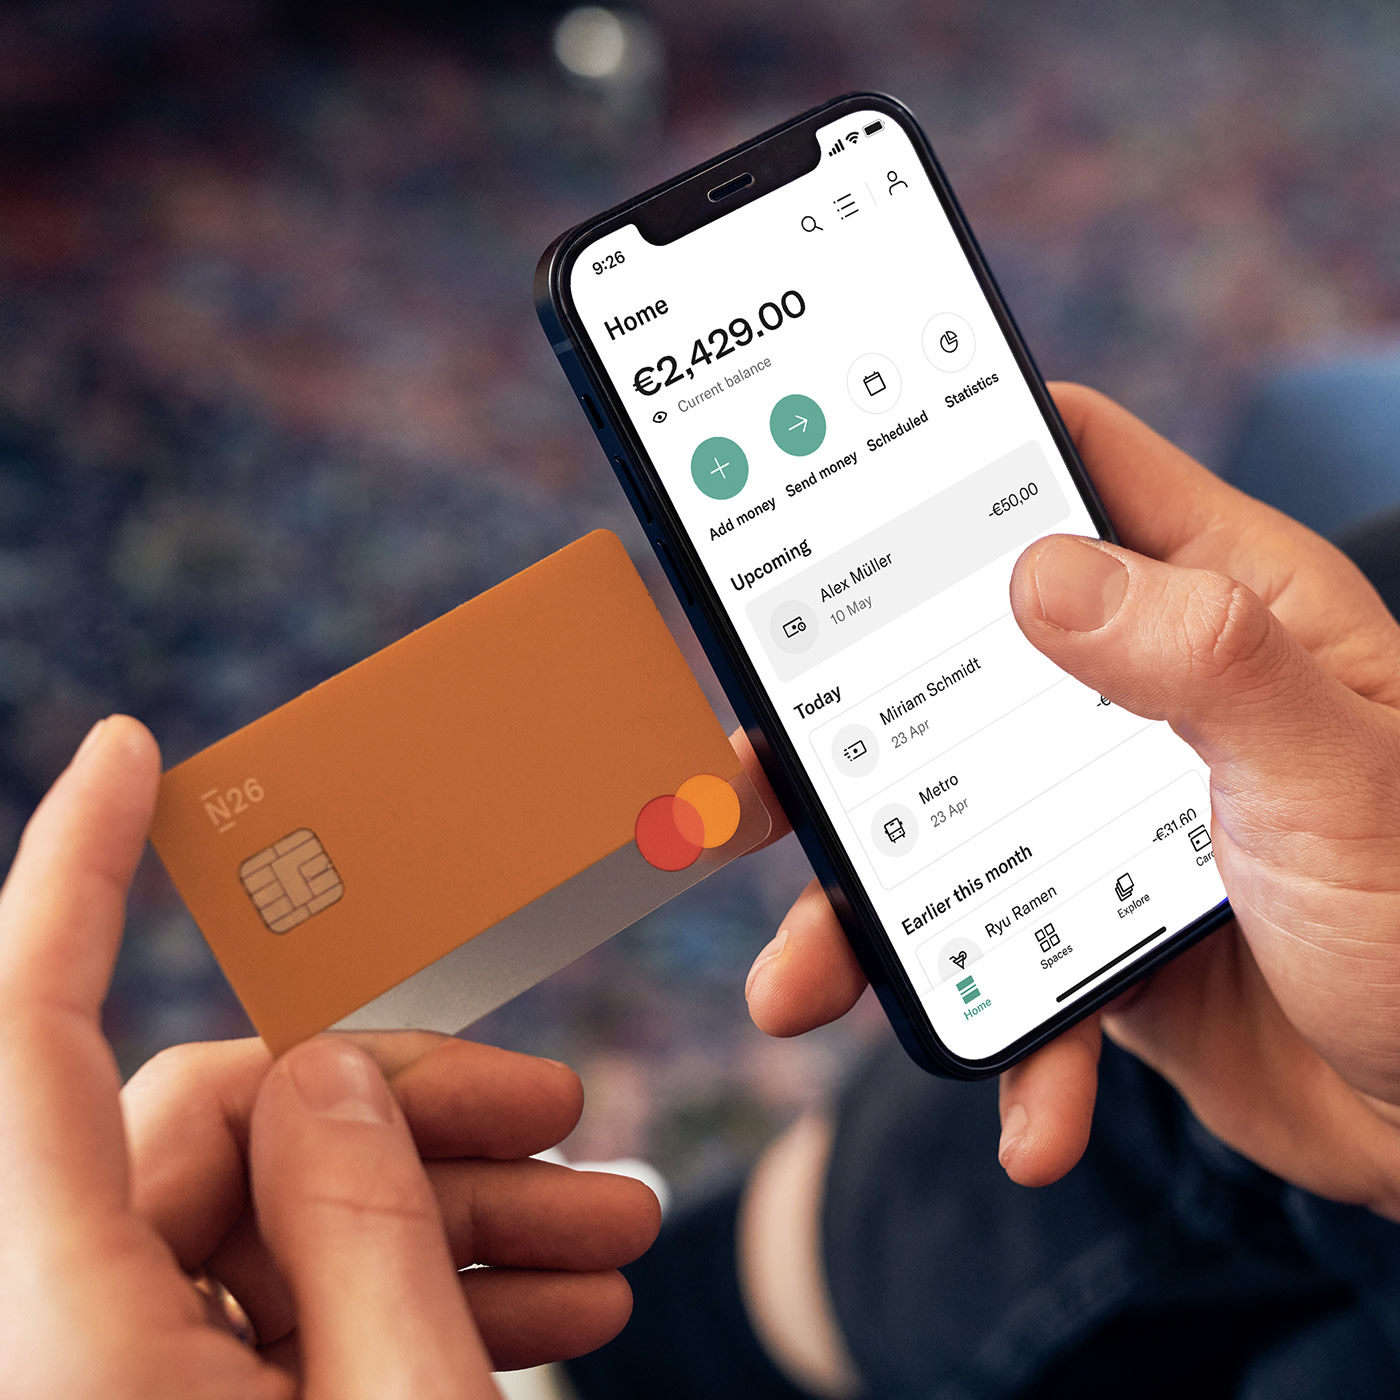 Image showing a person with an N26 debit card and the N26 app displaying the account feed with the list of transactions.